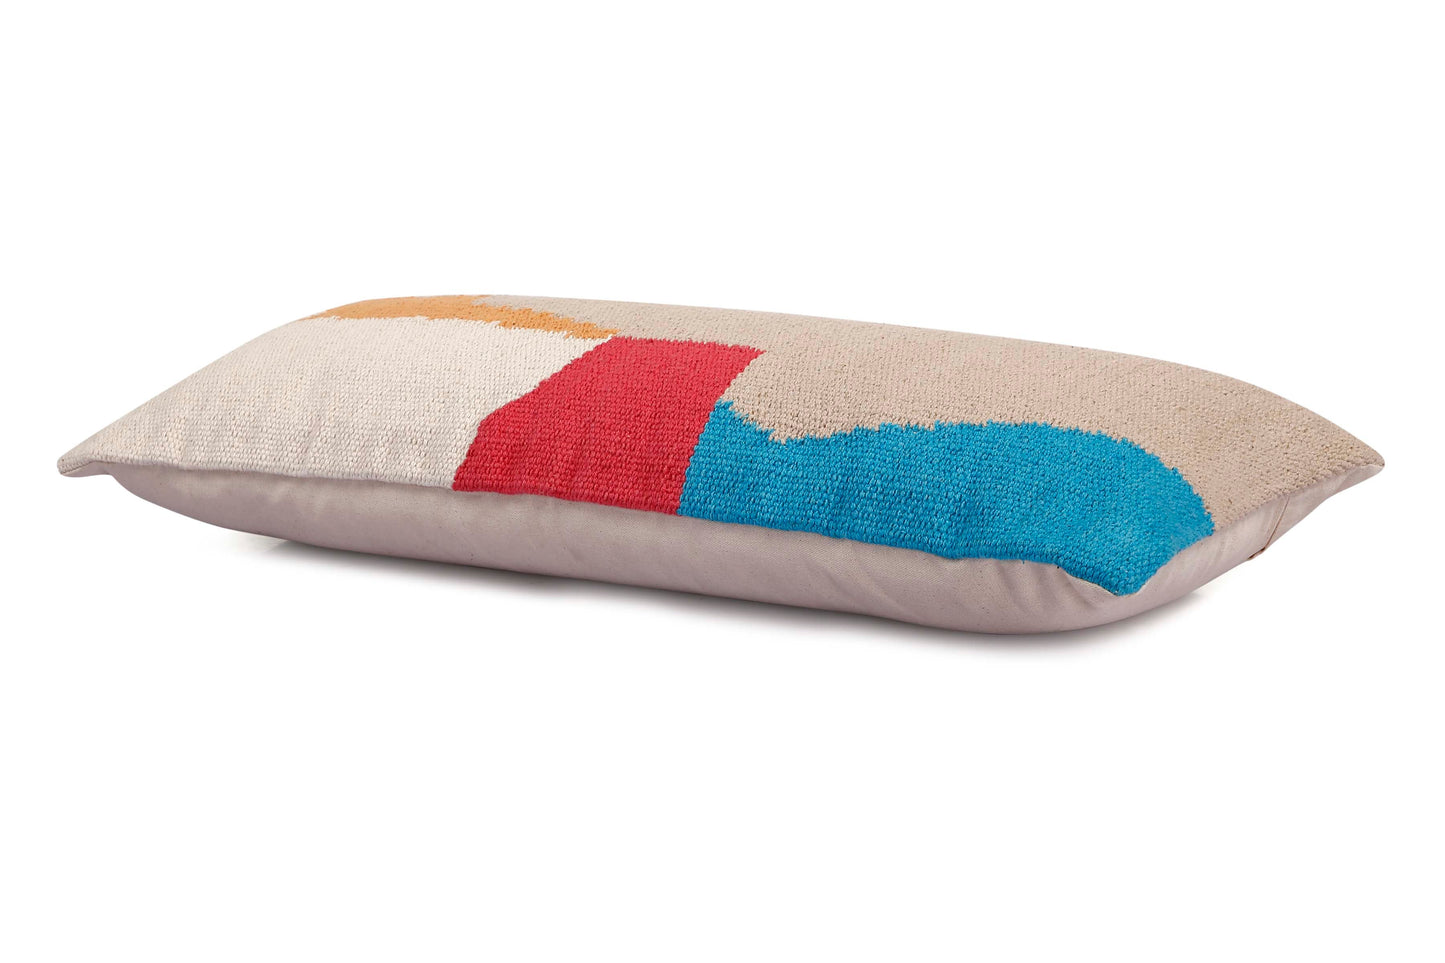 Leh Handcrafted Lumbar Pillow, Multi- 12x30 Inch by The Artisen